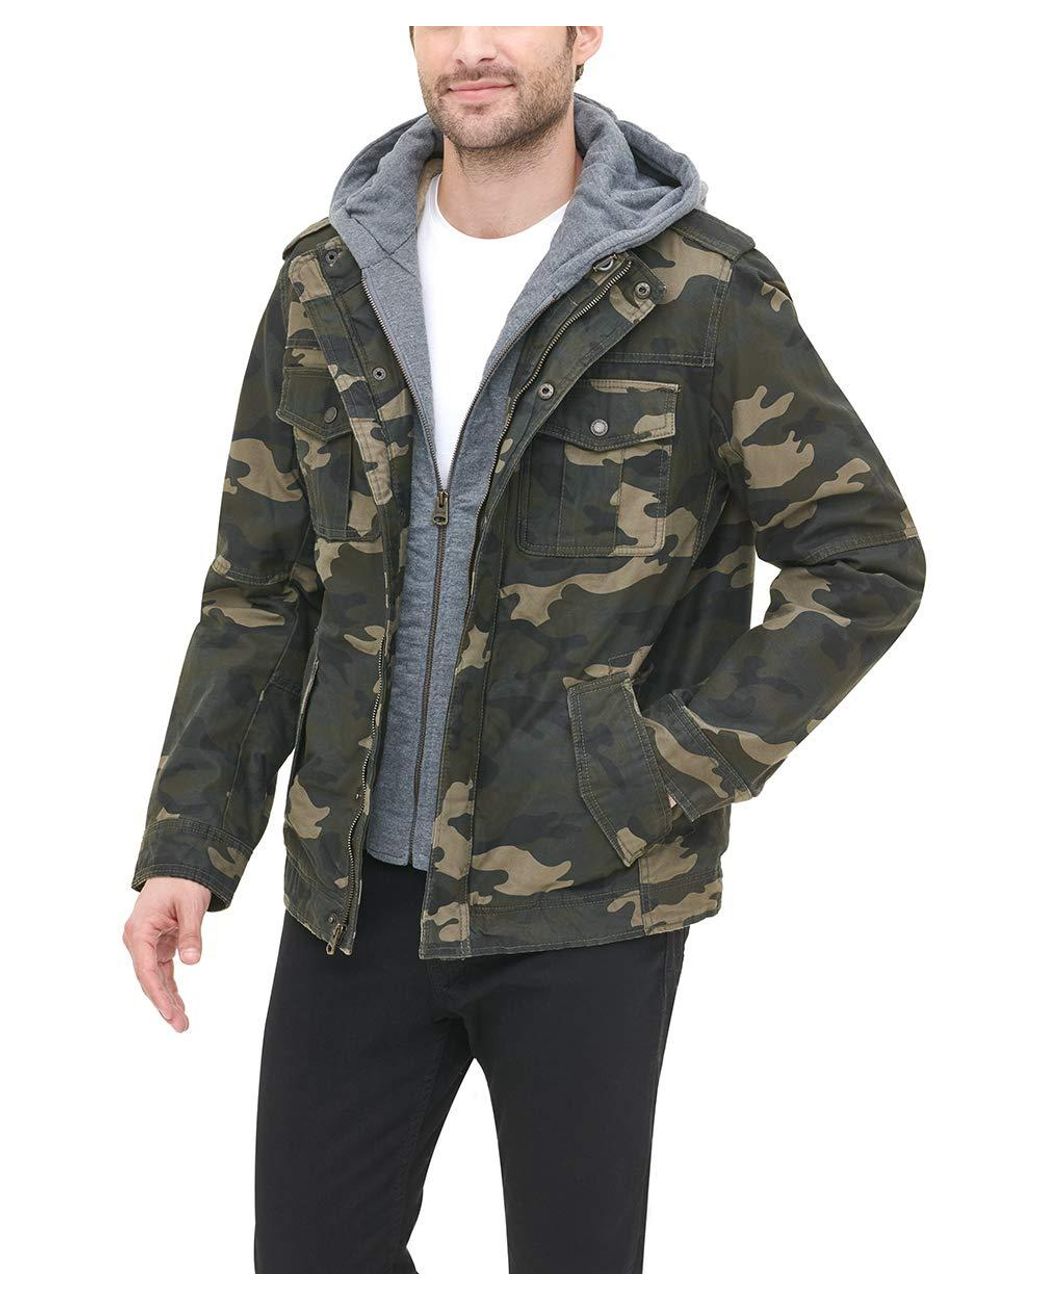 Levi's Big & Tall Washed Cotton Hooded Military Jacket in Camouflage ...